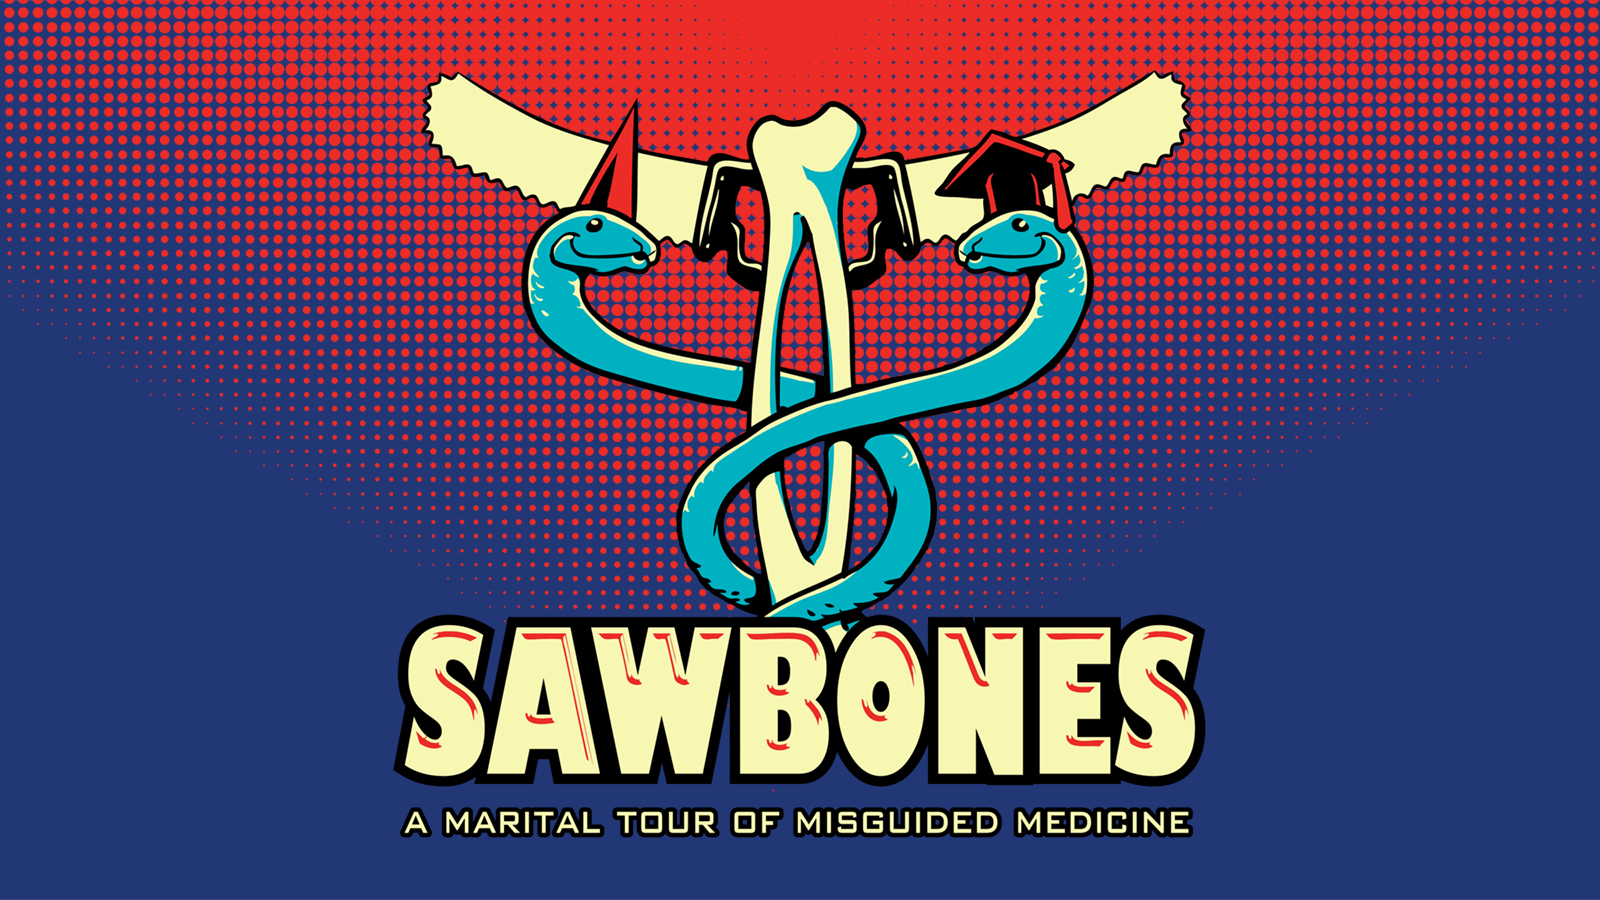 An illustration of two blue snakes twisting around a radius and ulna bone topped with a handsaw coming off either side to form a caduceus staff. The snake on the left is wearing a red dunce cap and the snake on the right is wearing a red graduation cap. The background is a pop art style red to blue fade. At the bottom of the image it says “Sawbones” with “A marital tour of misguided medicine” written below that.